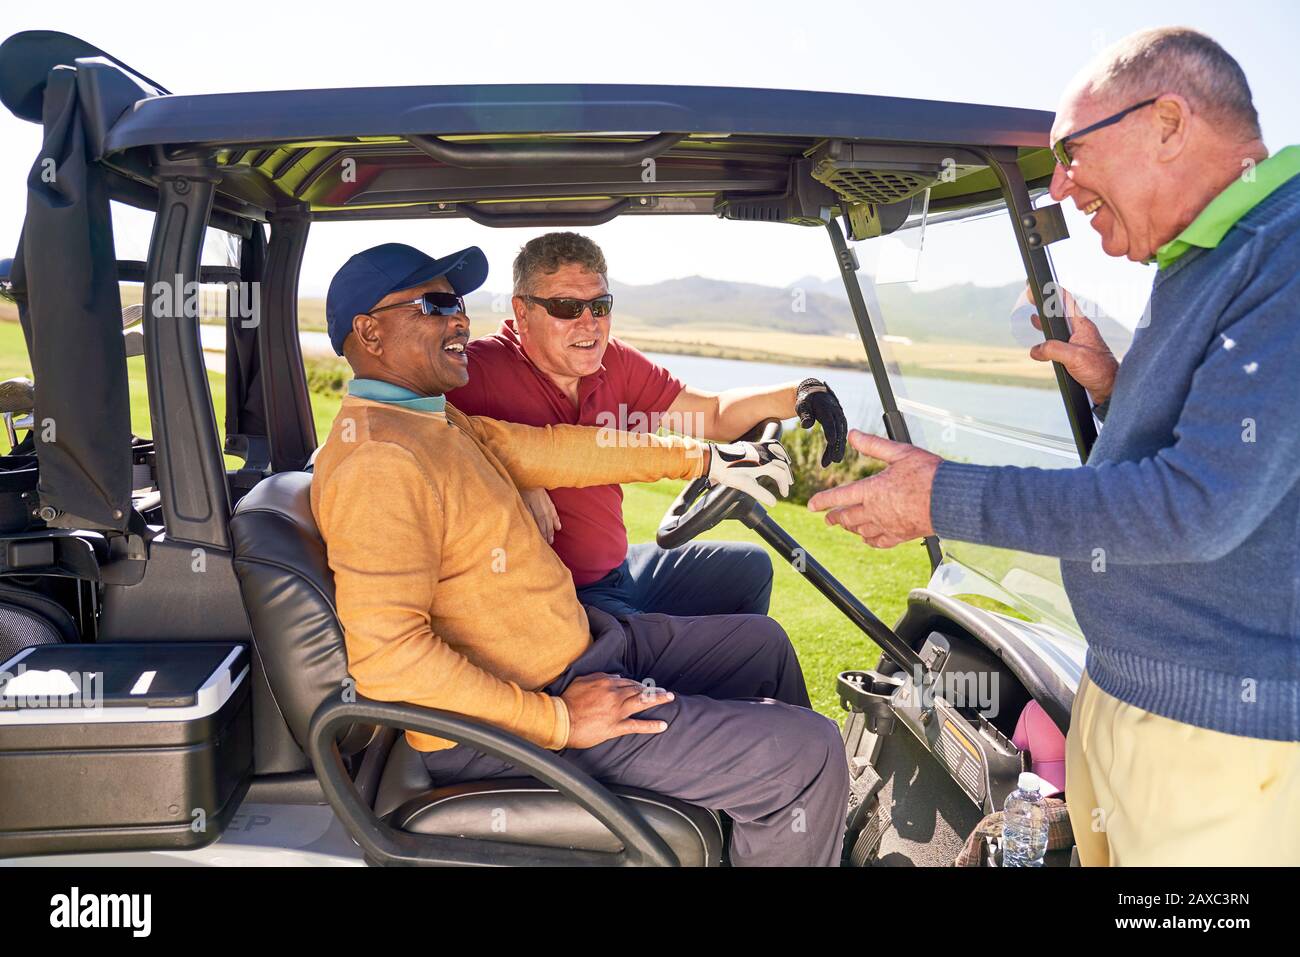 Male golfers talking at sunny golf cart Stock Photo